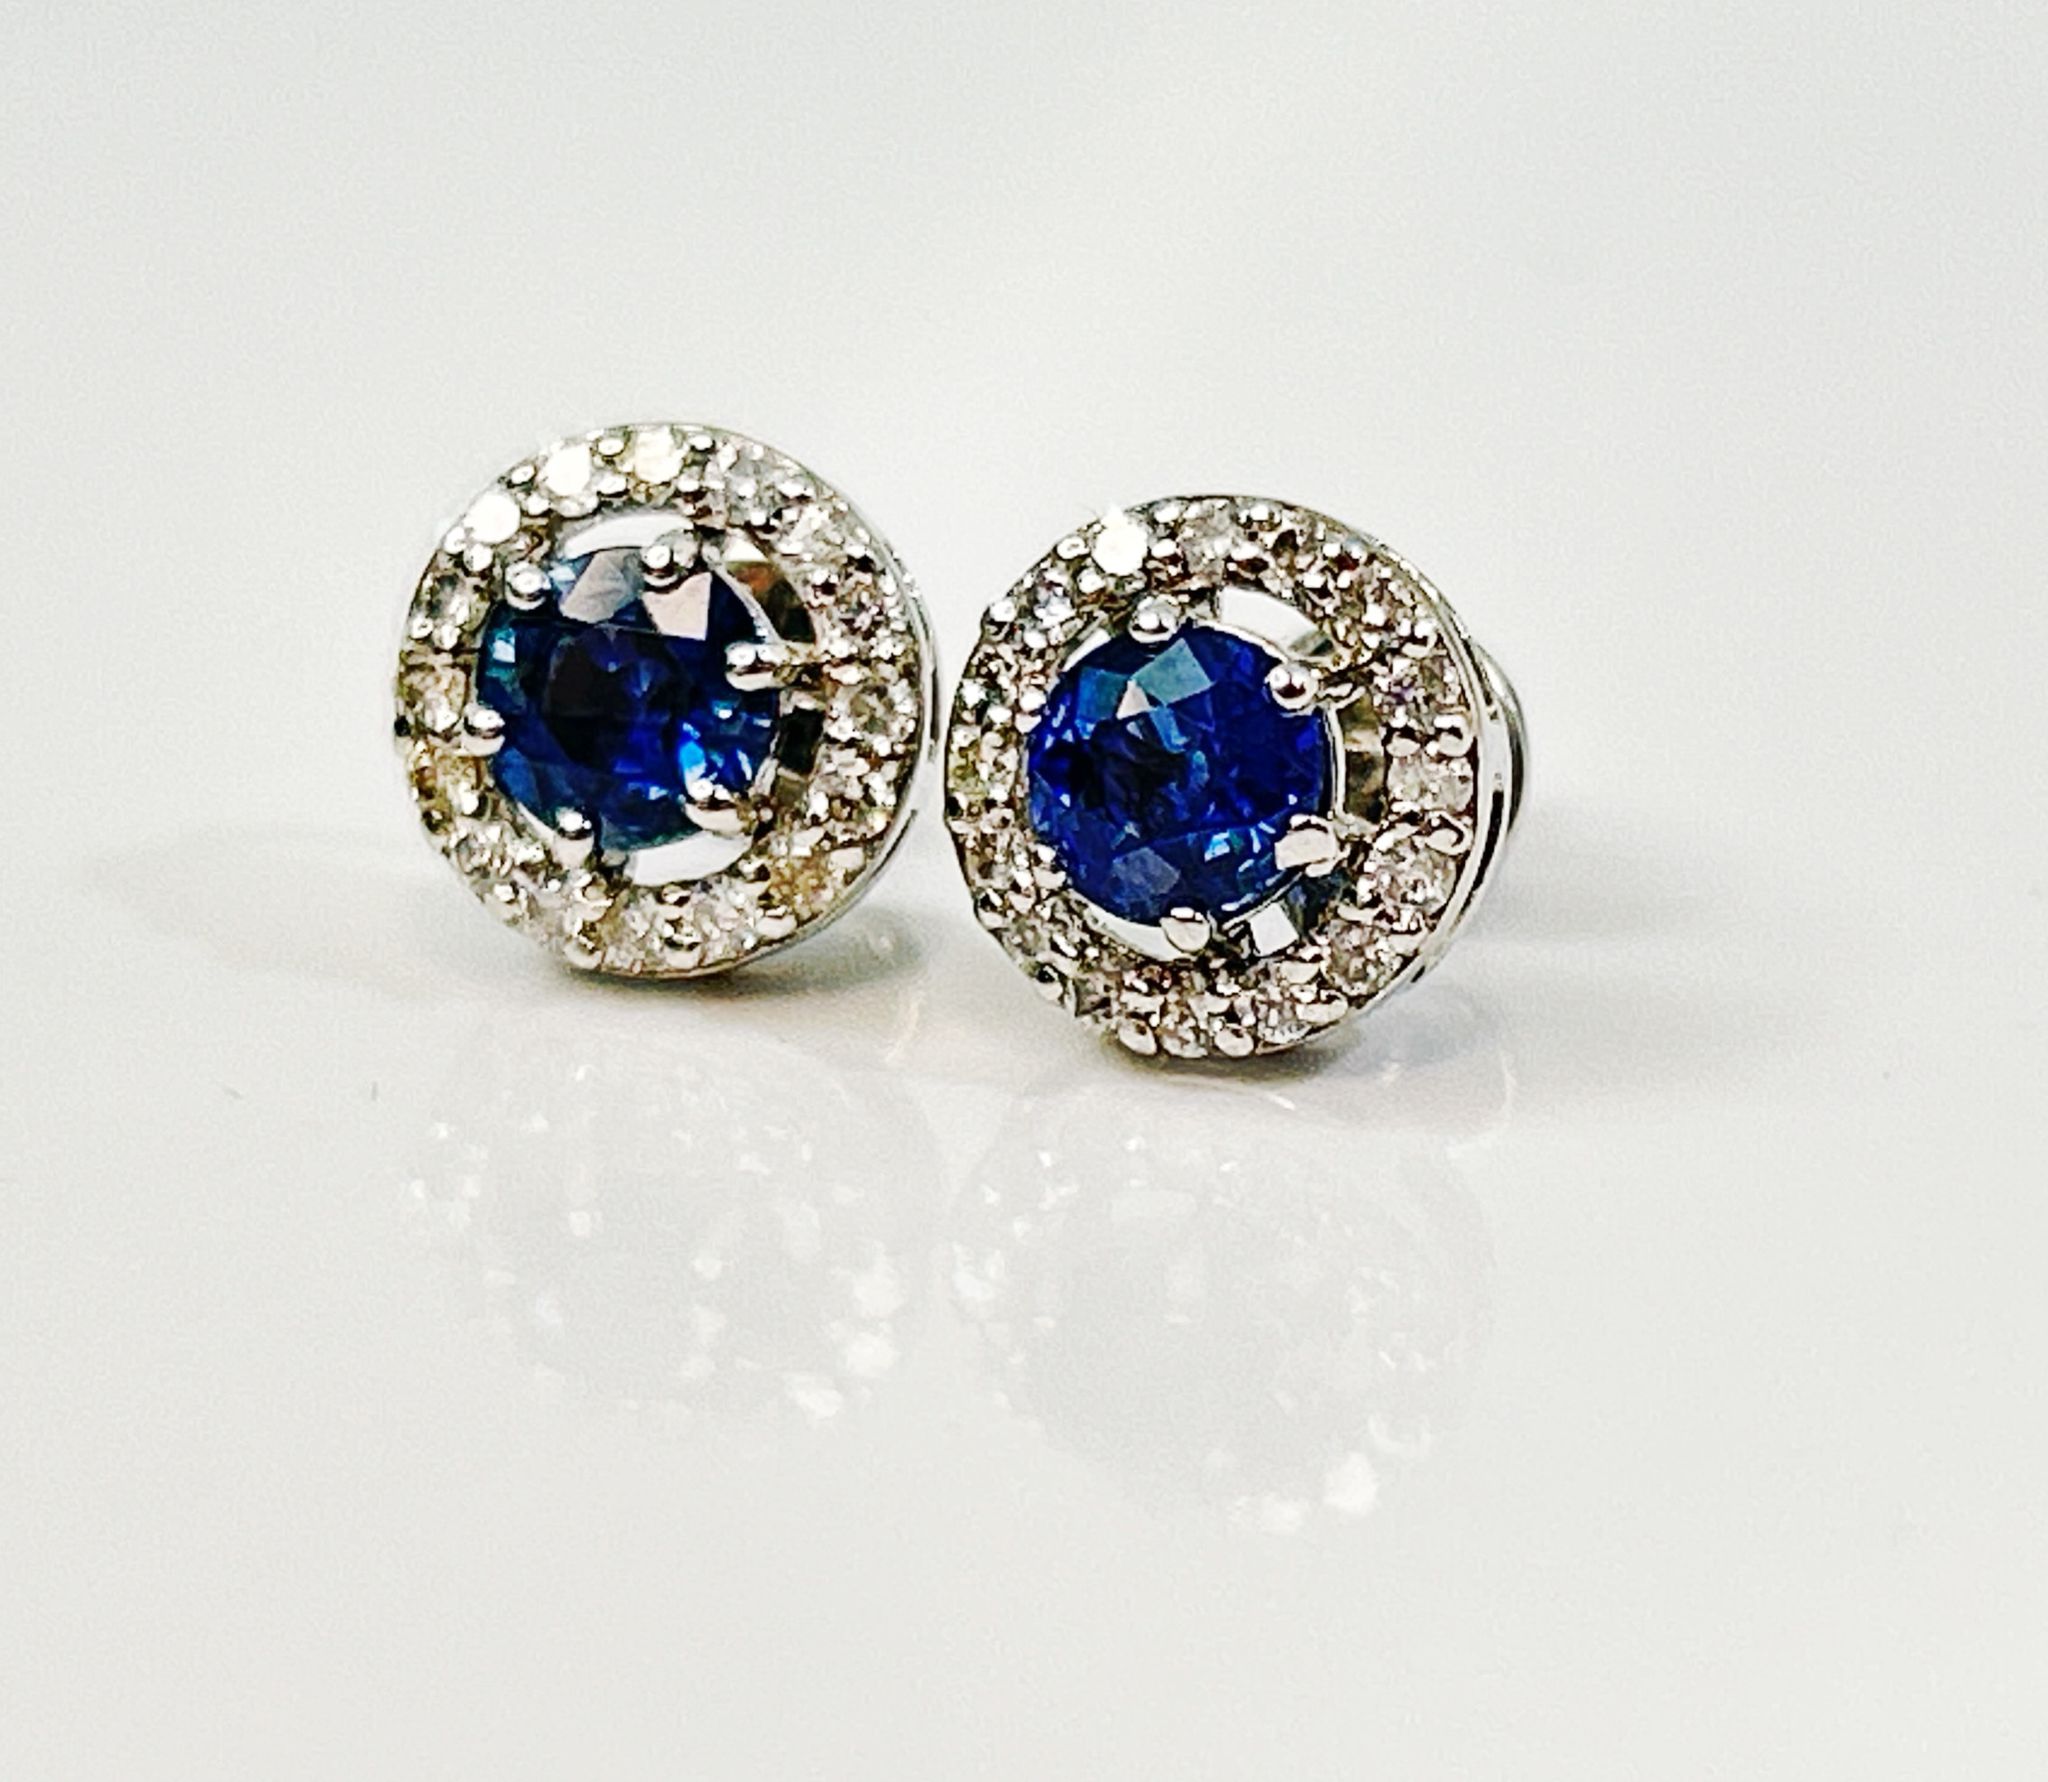 Beautiful Natural Unheated Blue Sapphire Earrings With Diamonds & Platinum - Image 3 of 6